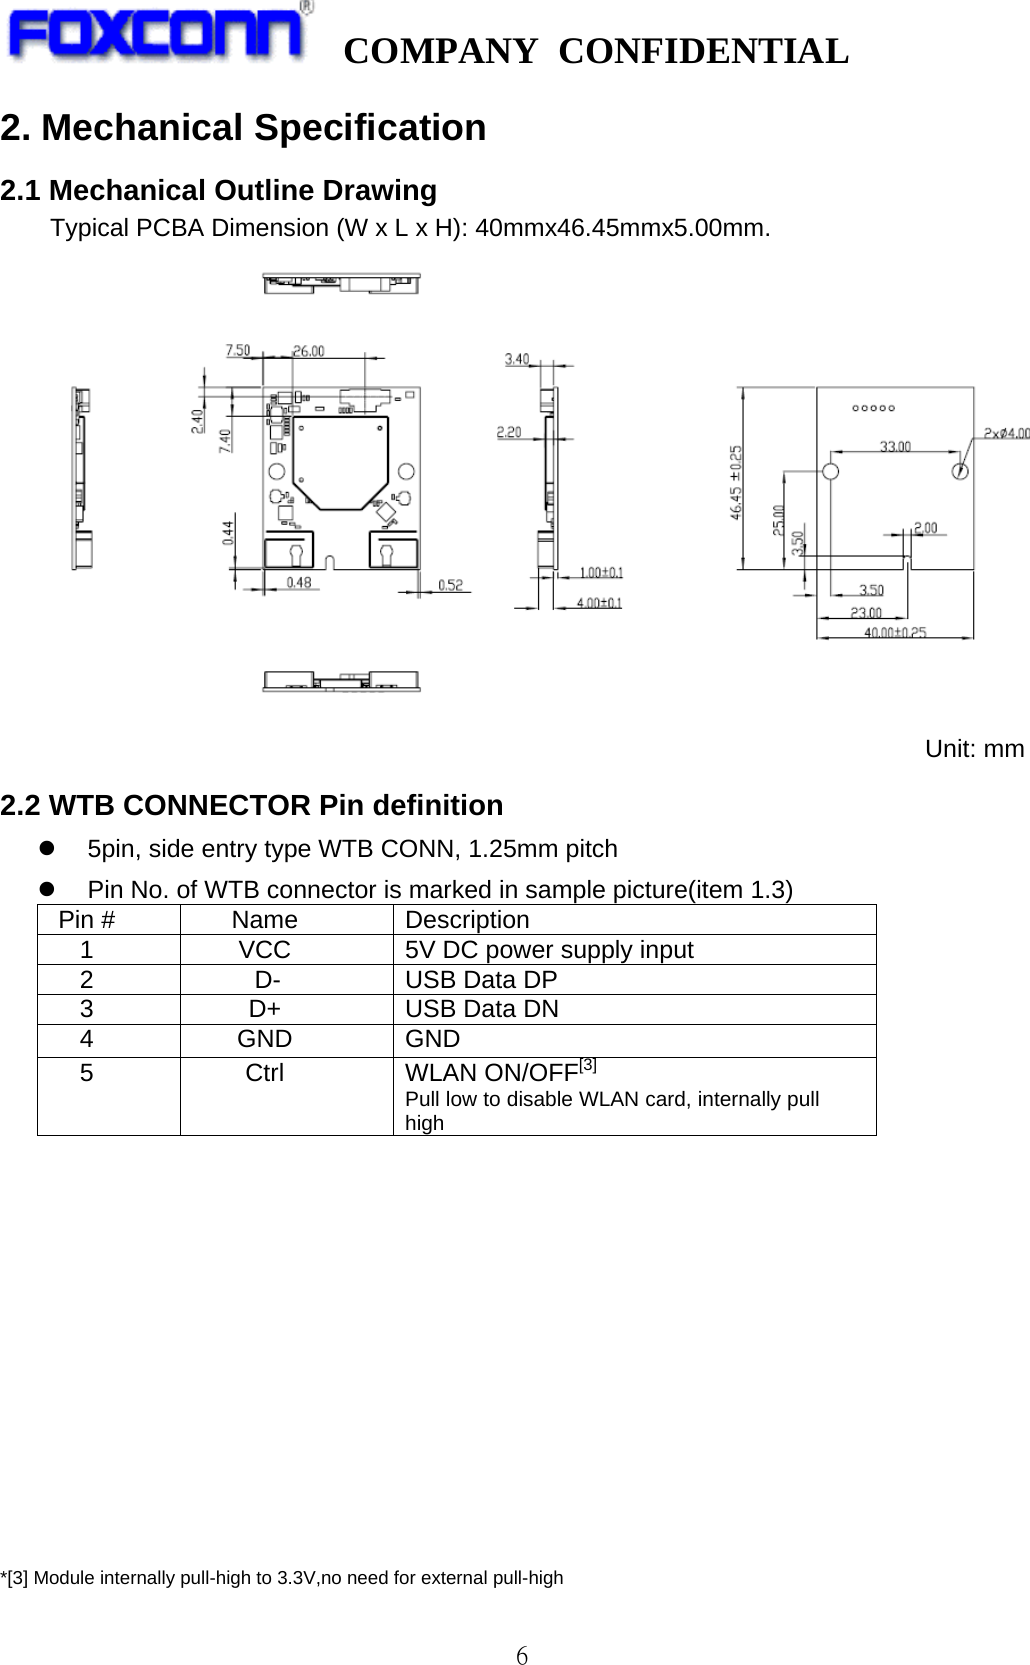   COMPANY CONFIDENTIAL             6 2. Mechanical Specification 2.1 Mechanical Outline Drawing   Typical PCBA Dimension (W x L x H): 40mmx46.45mmx5.00mm. Unit: mm 2.2 WTB CONNECTOR Pin definition   5pin, side entry type WTB CONN, 1.25mm pitch  Pin No. of WTB connector is marked in sample picture(item 1.3) Pin # Name Description 1 VCC 5V DC power supply input   2 D- USB Data DP 3 D+ USB Data DN 4 GND   GND 5 Ctrl WLAN ON/OFF[3]   Pull low to disable WLAN card, internally pull high                *[3] Module internally pull-high to 3.3V,no need for external pull-high 